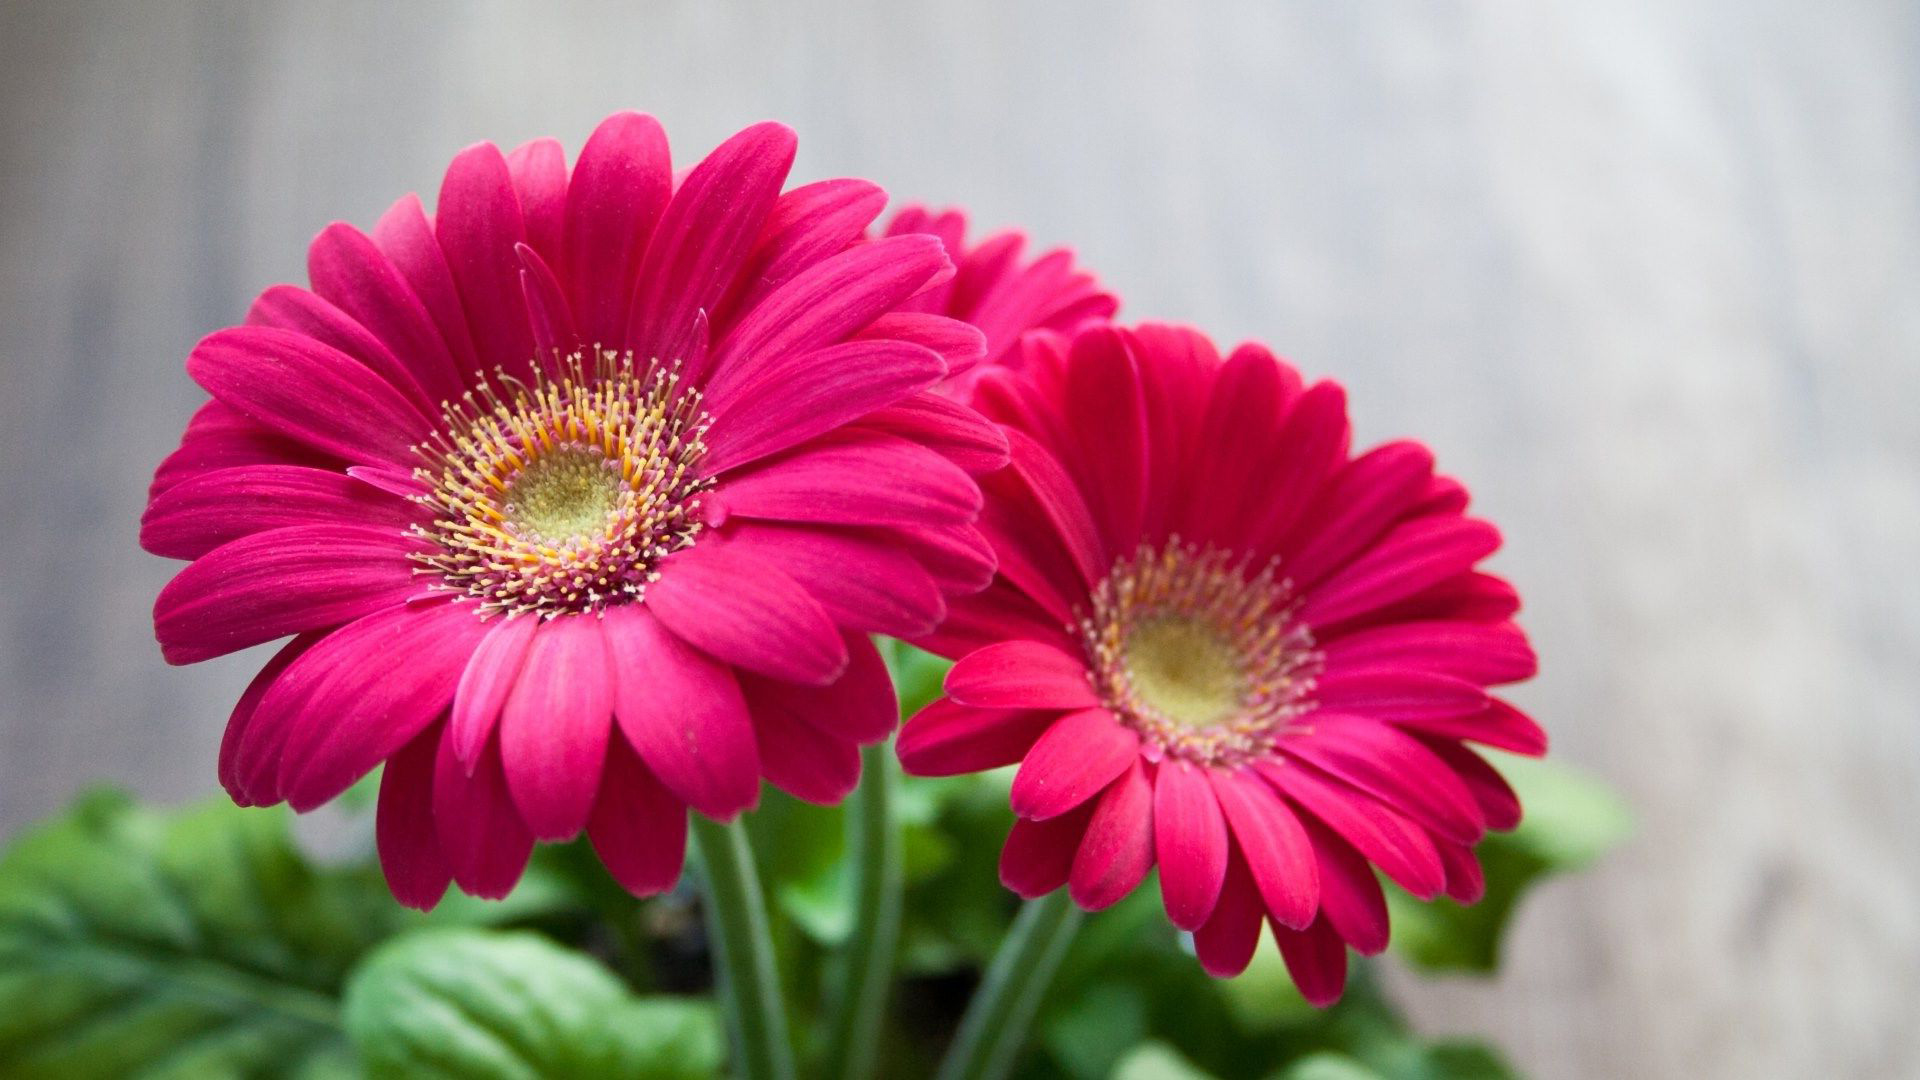 Best HD Wallpapers for Laptop 1080p with Pink Daisy Flower ...